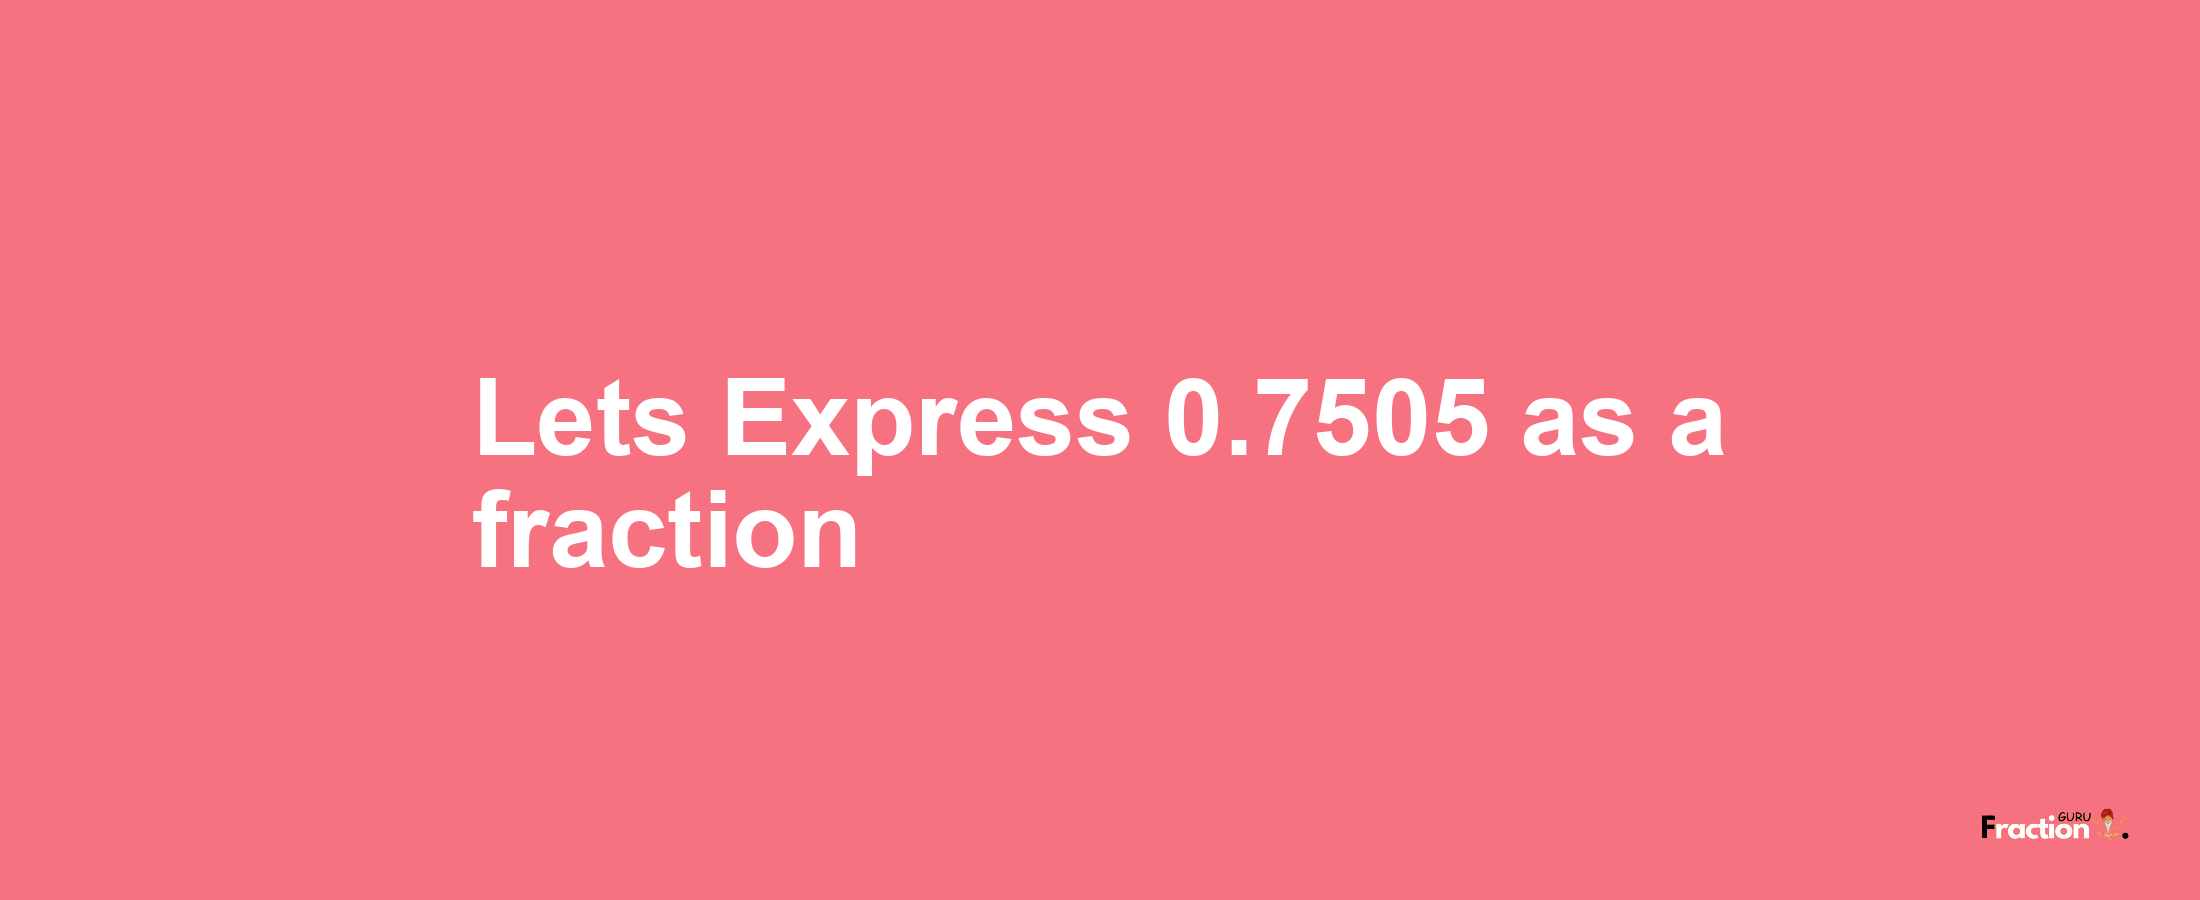 Lets Express 0.7505 as afraction